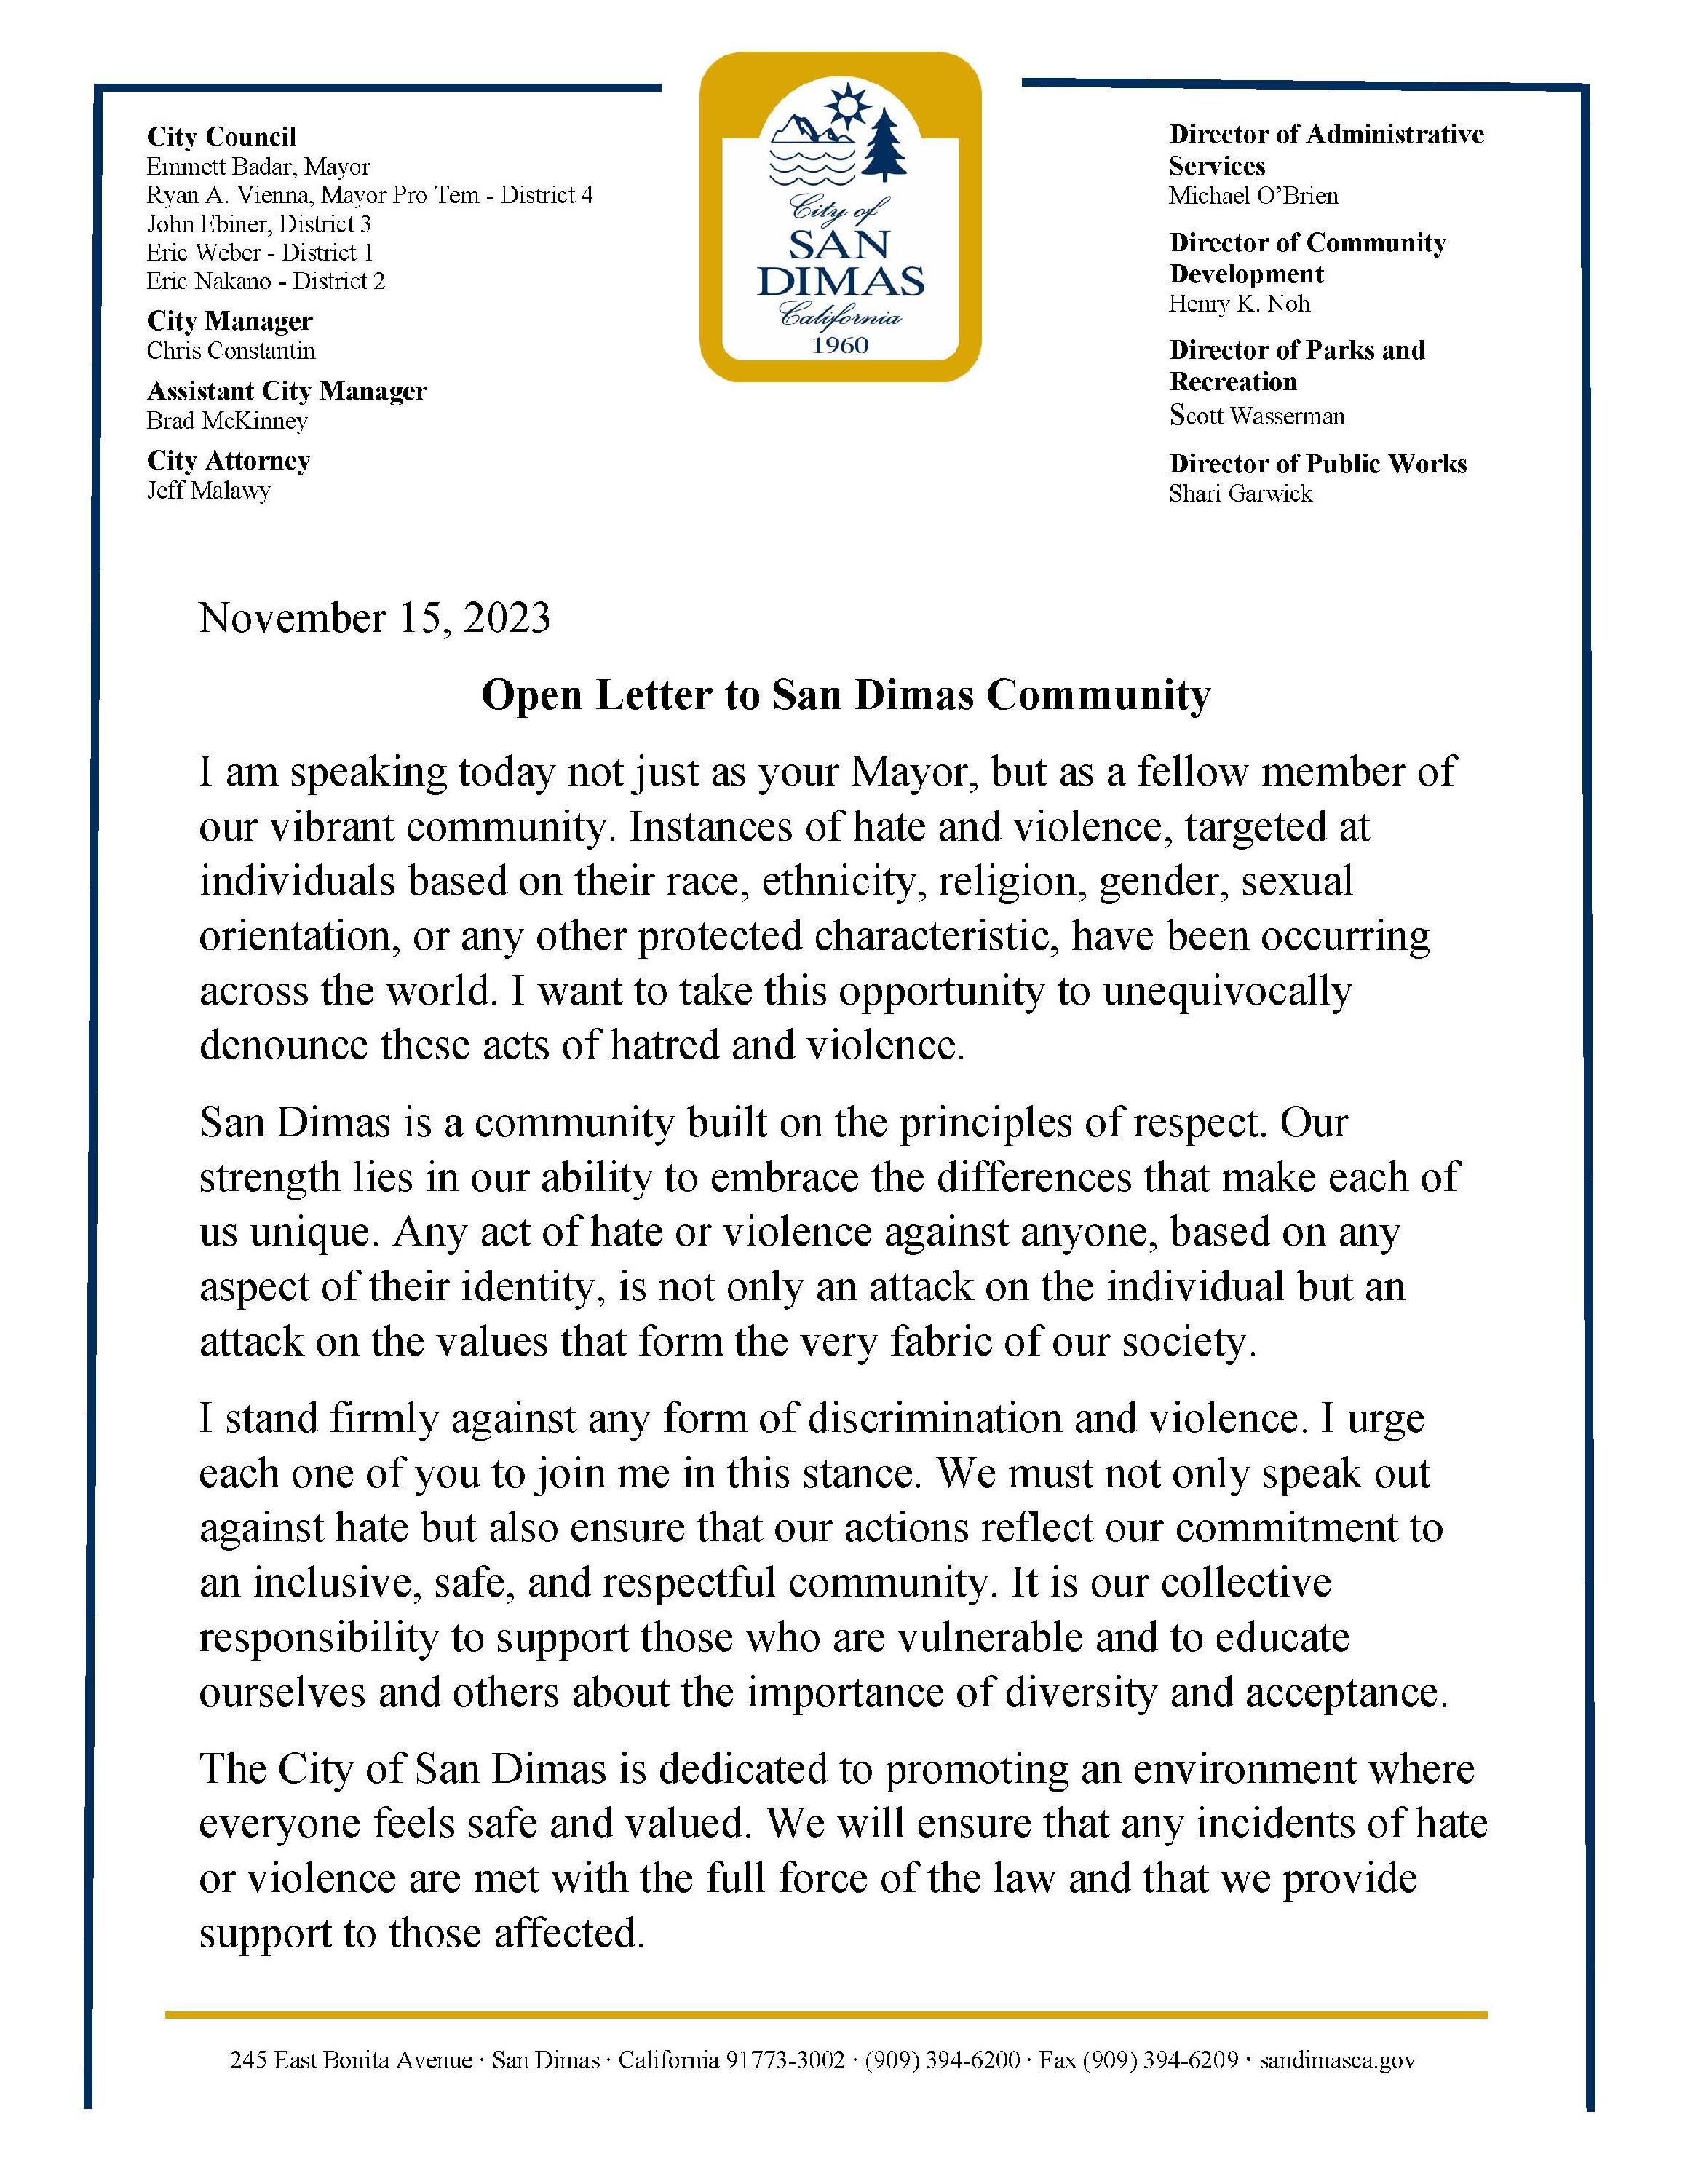 Open Letter to San Dimas Community from Mayor Badar - 11.15.23_Page_1